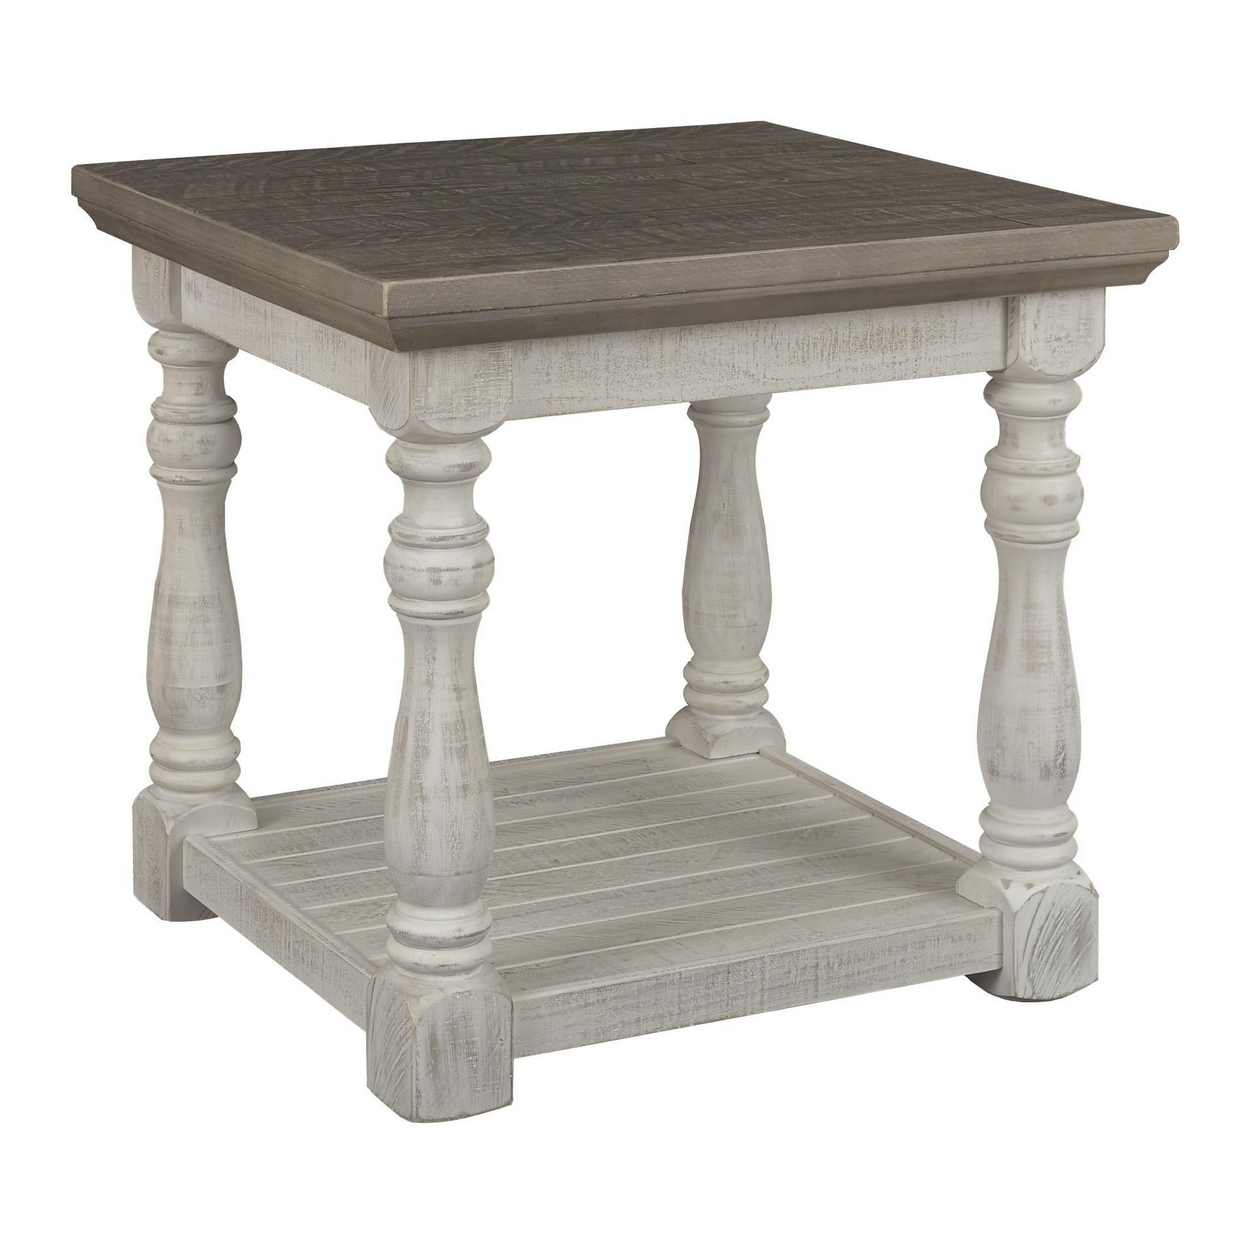 Plank Style End Table With Turned Legs And Open Shelf, White And Gray- Saltoro Sherpi